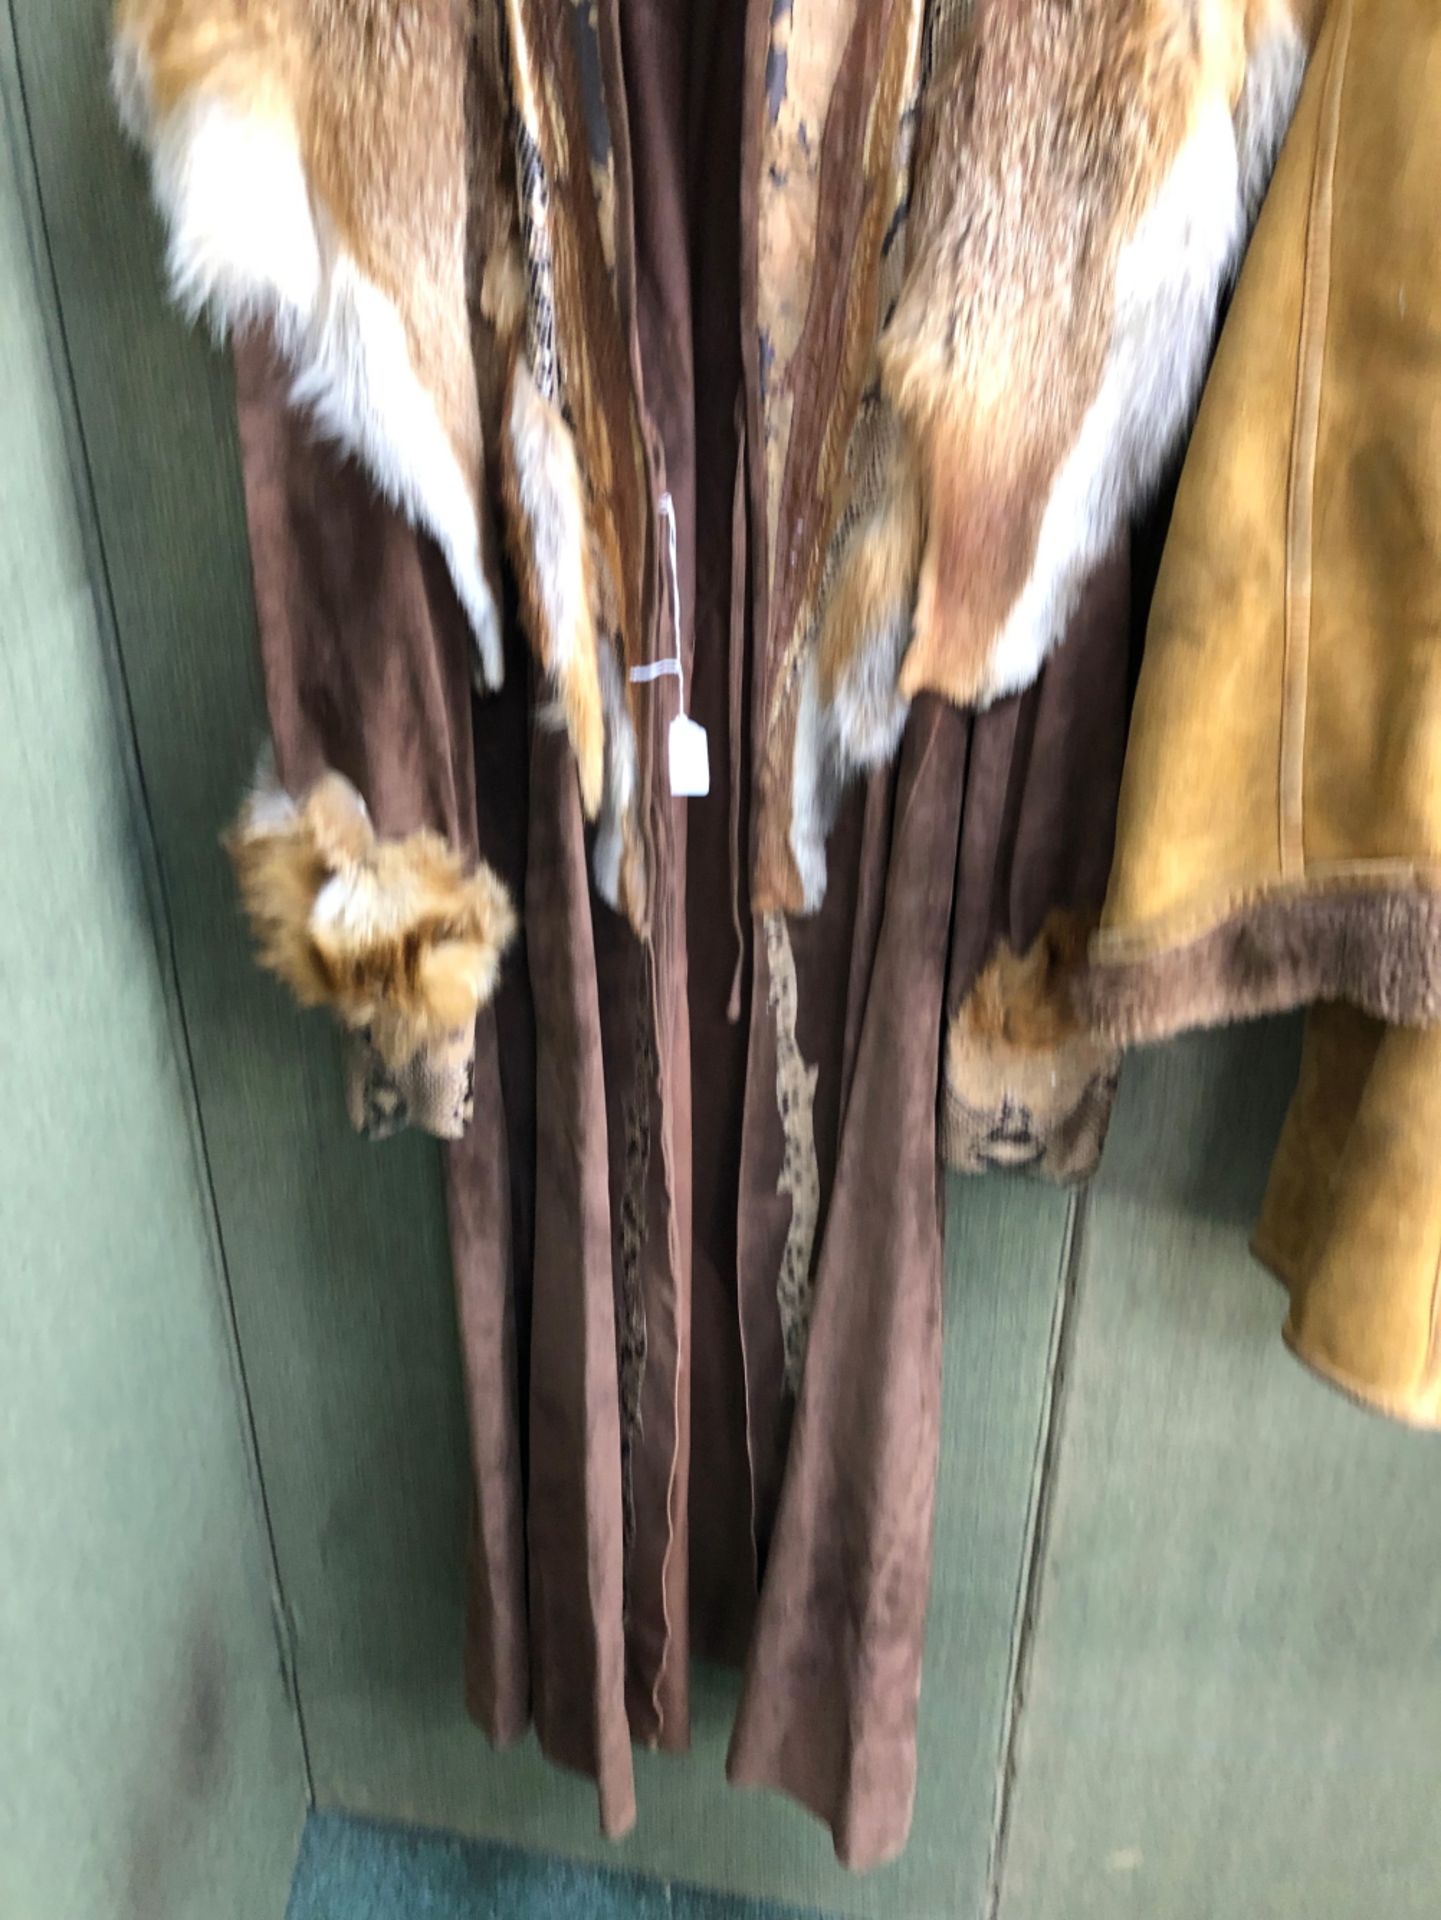 JACKETS: STRIWA 3/4 LENGTH FAWN COLOURED SHEEP SKIN JACKET WITH HOOD SIZE STATED EUR 36, TOGETHER - Bild 3 aus 21